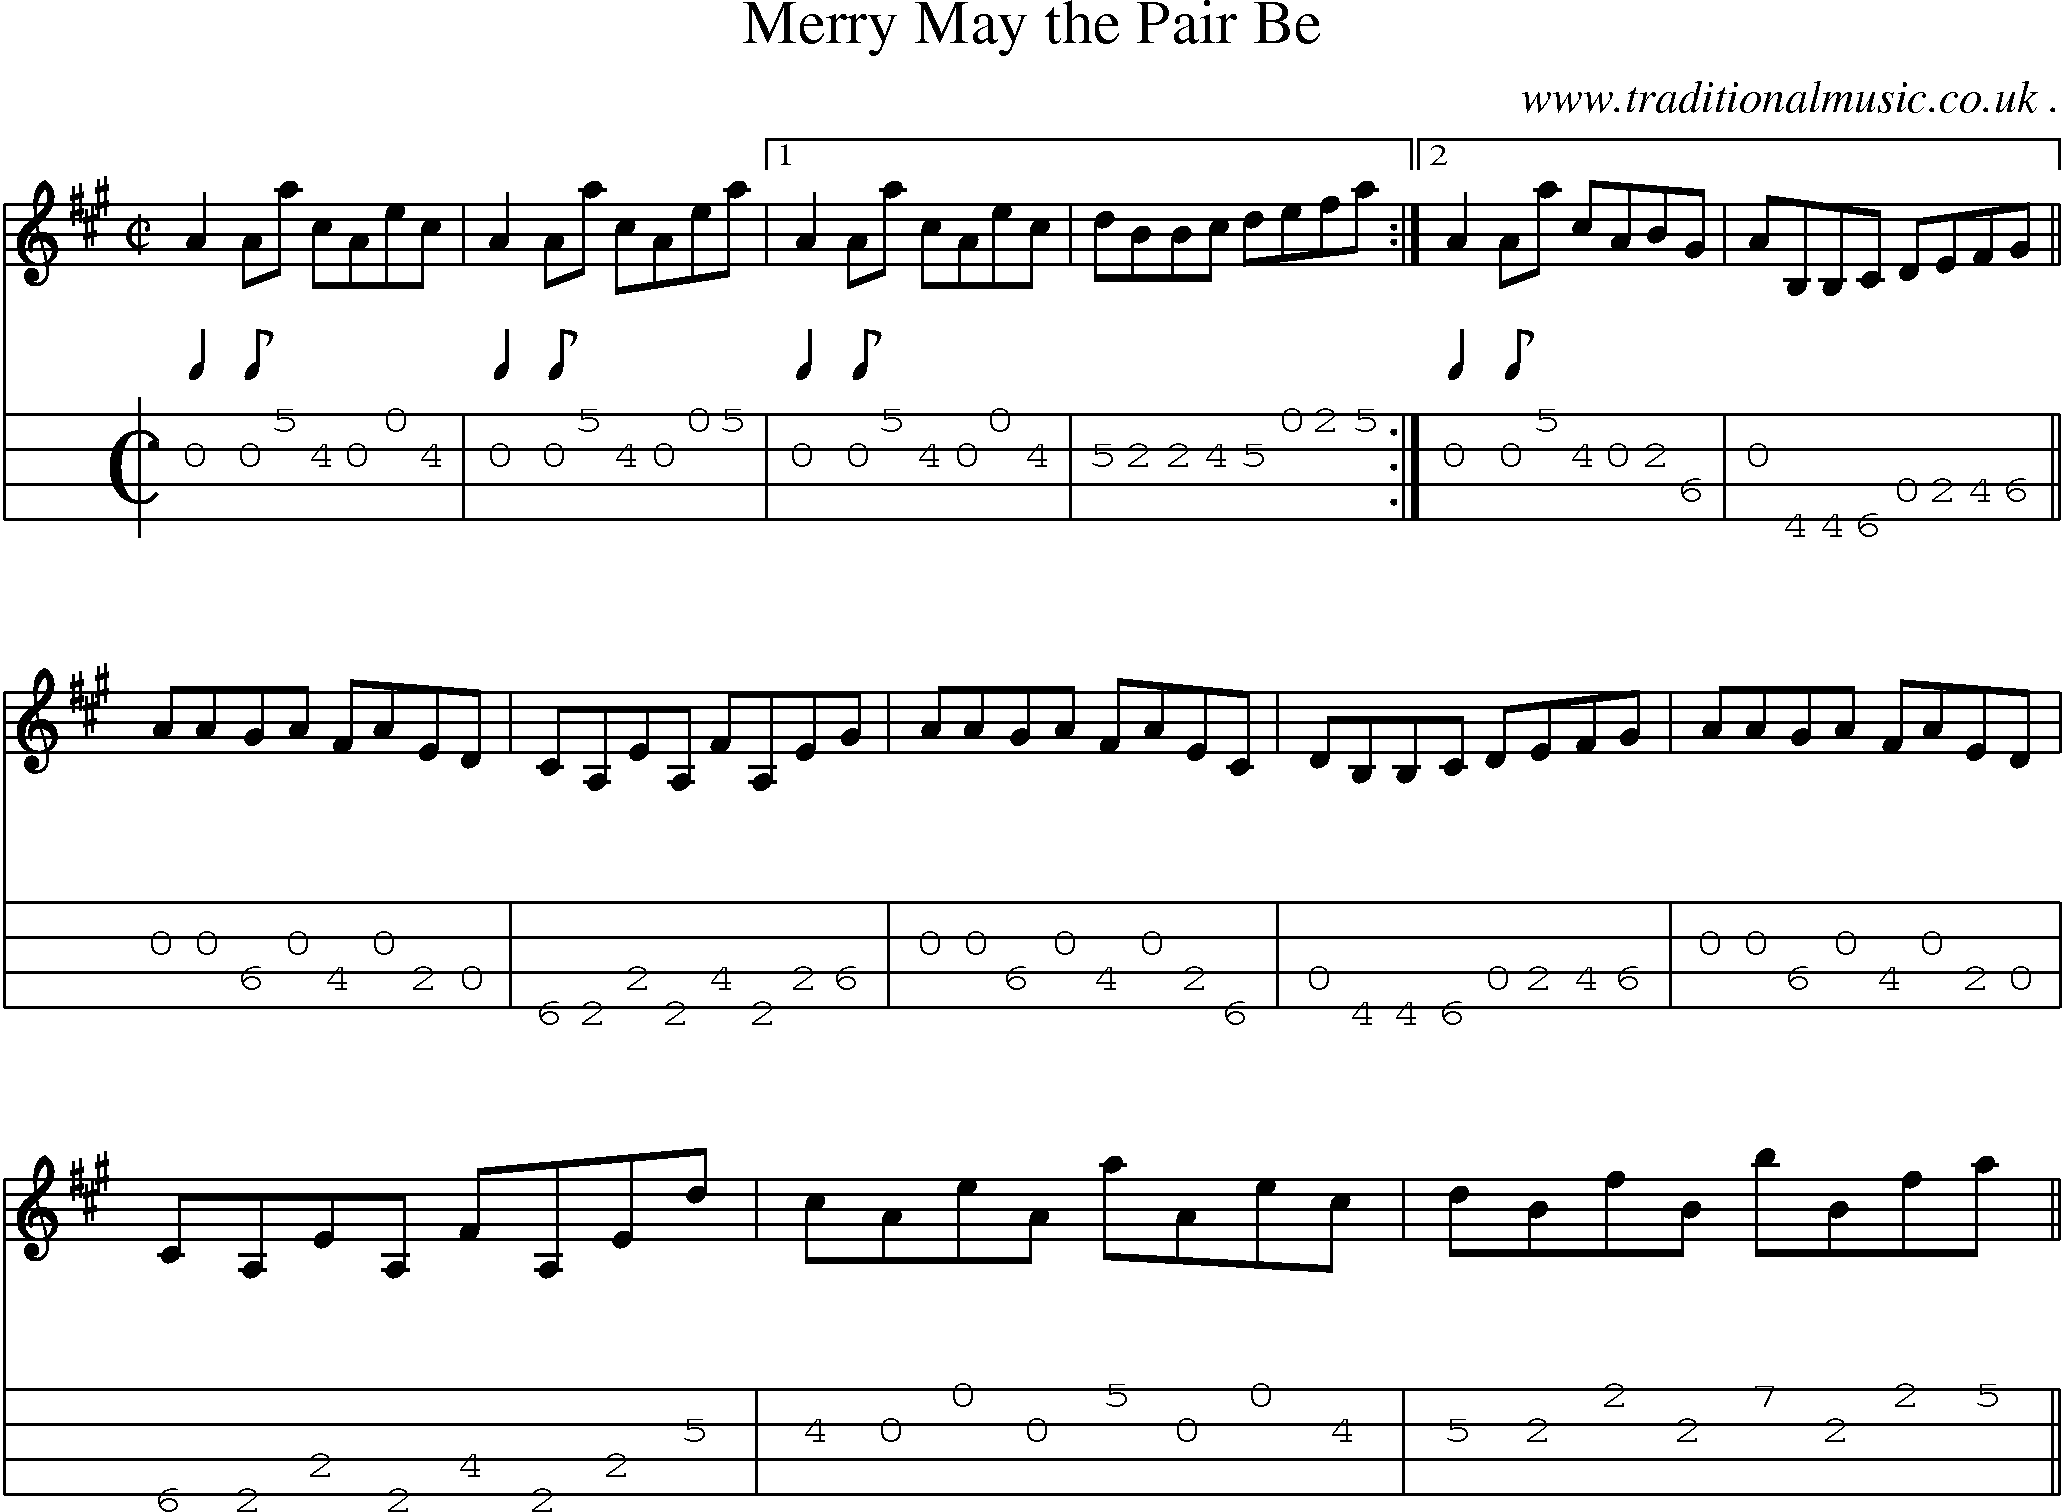 Sheet-music  score, Chords and Mandolin Tabs for Merry May The Pair Be